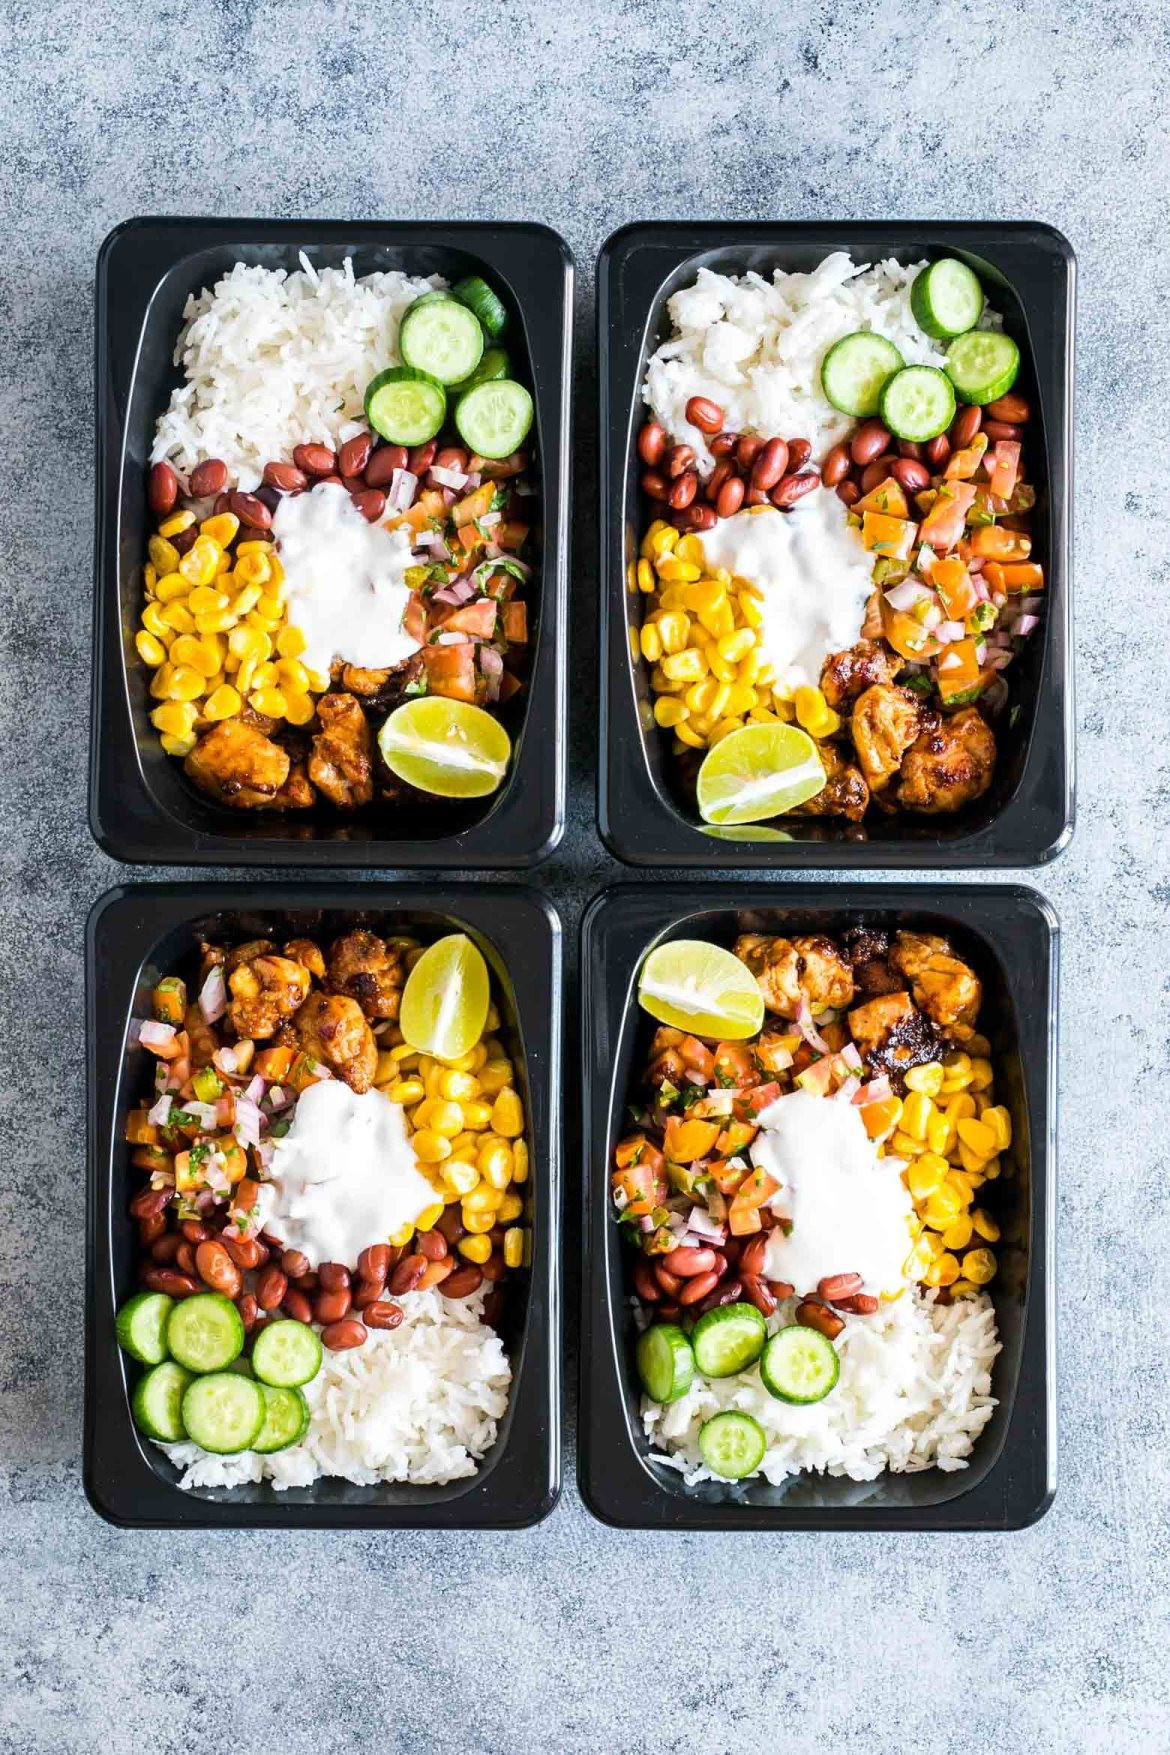 Meal Prep Dinner Ideas
 10 Meal Prep Ideas for the Week That Are Healthy & Delicious